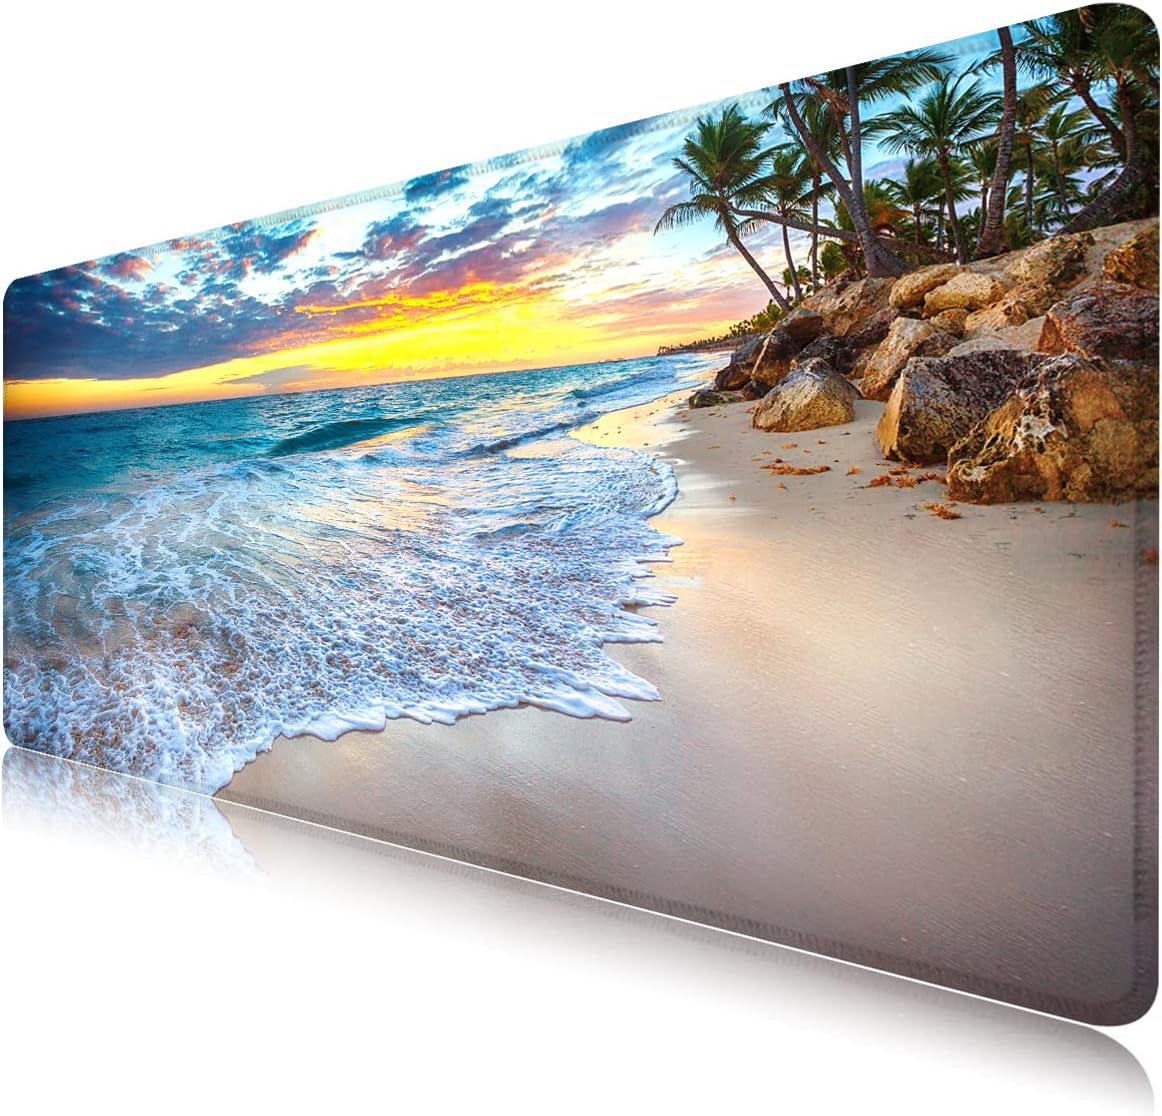 Mouse Pad Large Extended Keyboard Mouse Pad Beach Ocean 35.5x15.8 inch Gaming Mouse Pad, XXL Mouse Pad Mouse Pad for Work and Gaming Oversized Mouse Pad